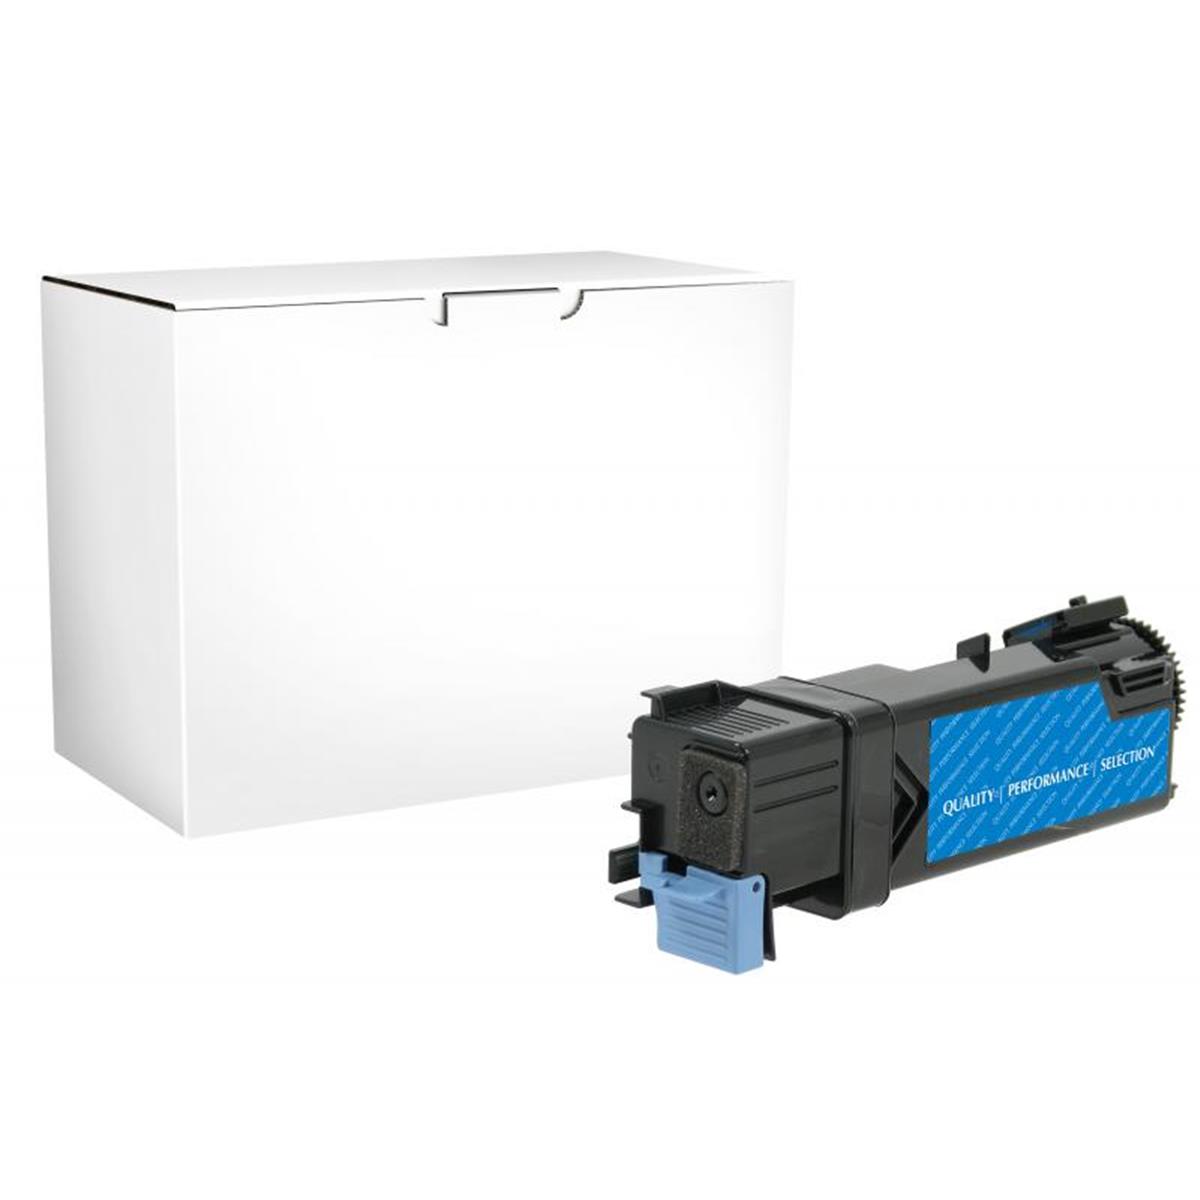 Picture of Dell 200657 High Yield Cyan Toner Cartridge for Dell 2150 & 2155